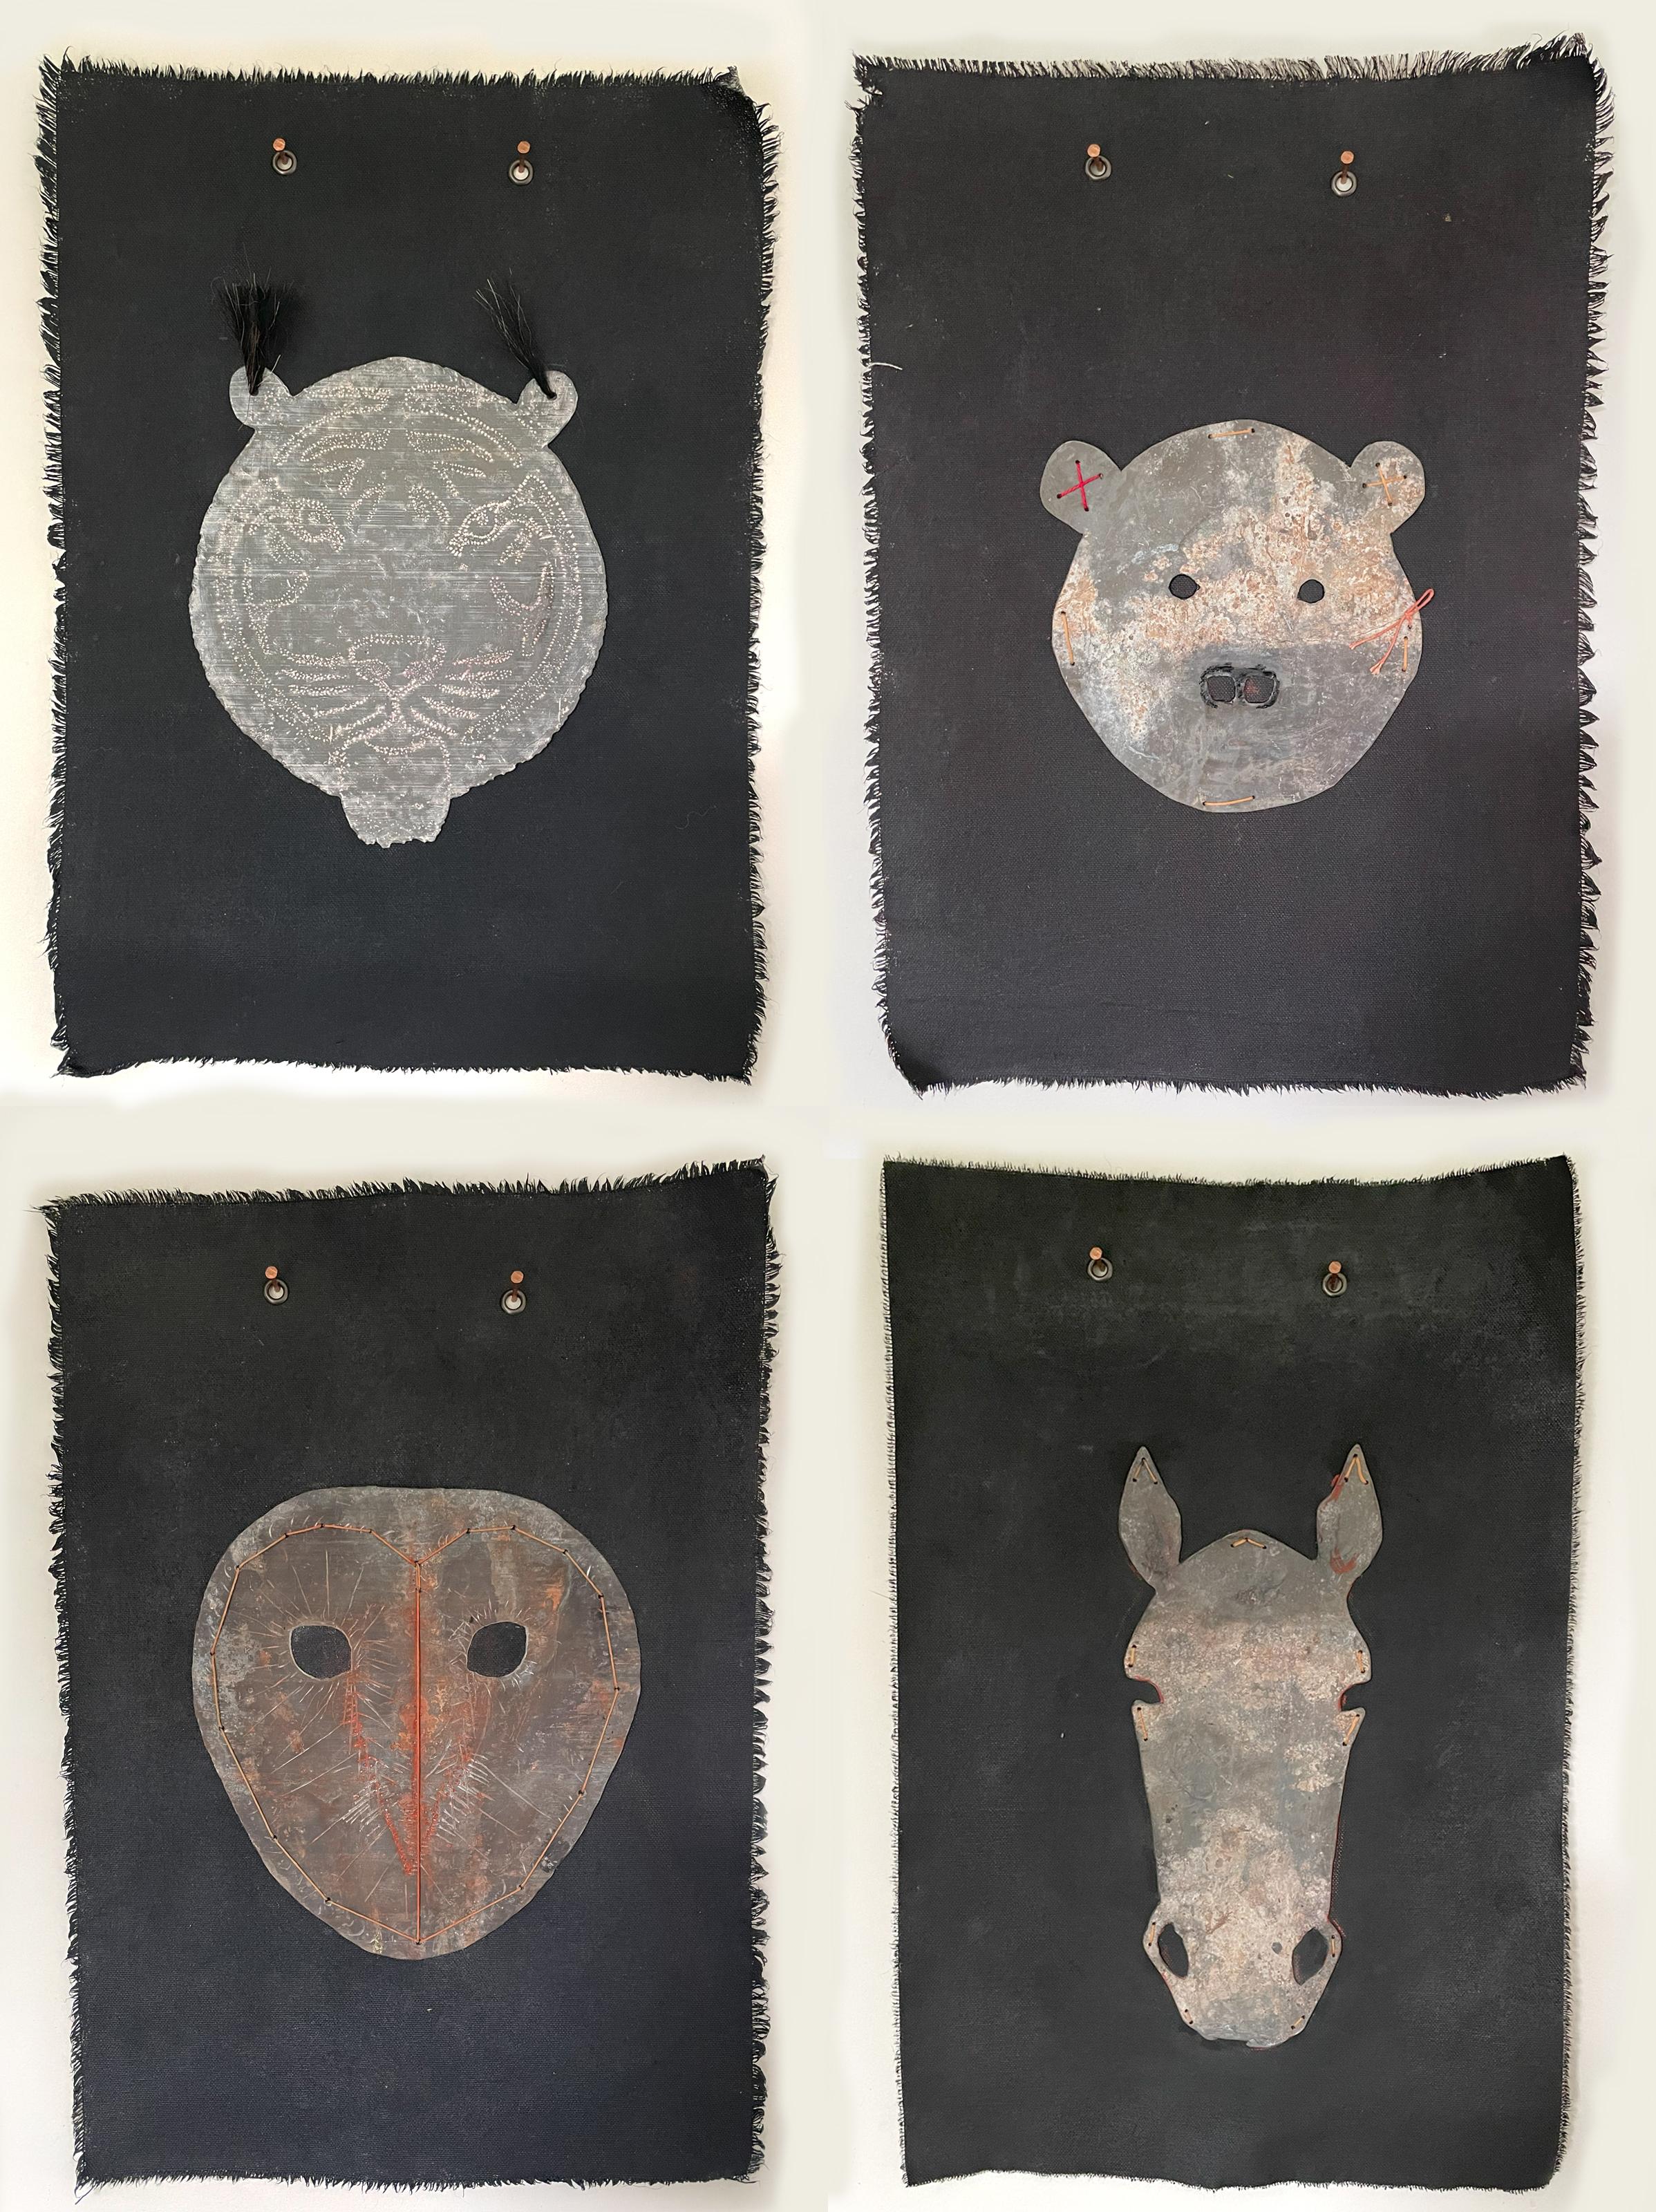 Four Fiber Wall Hangings: 'The Masks We Wear Series, Tiger, Teddy, Owl, Horse' - Mixed Media Art by Gin Stone